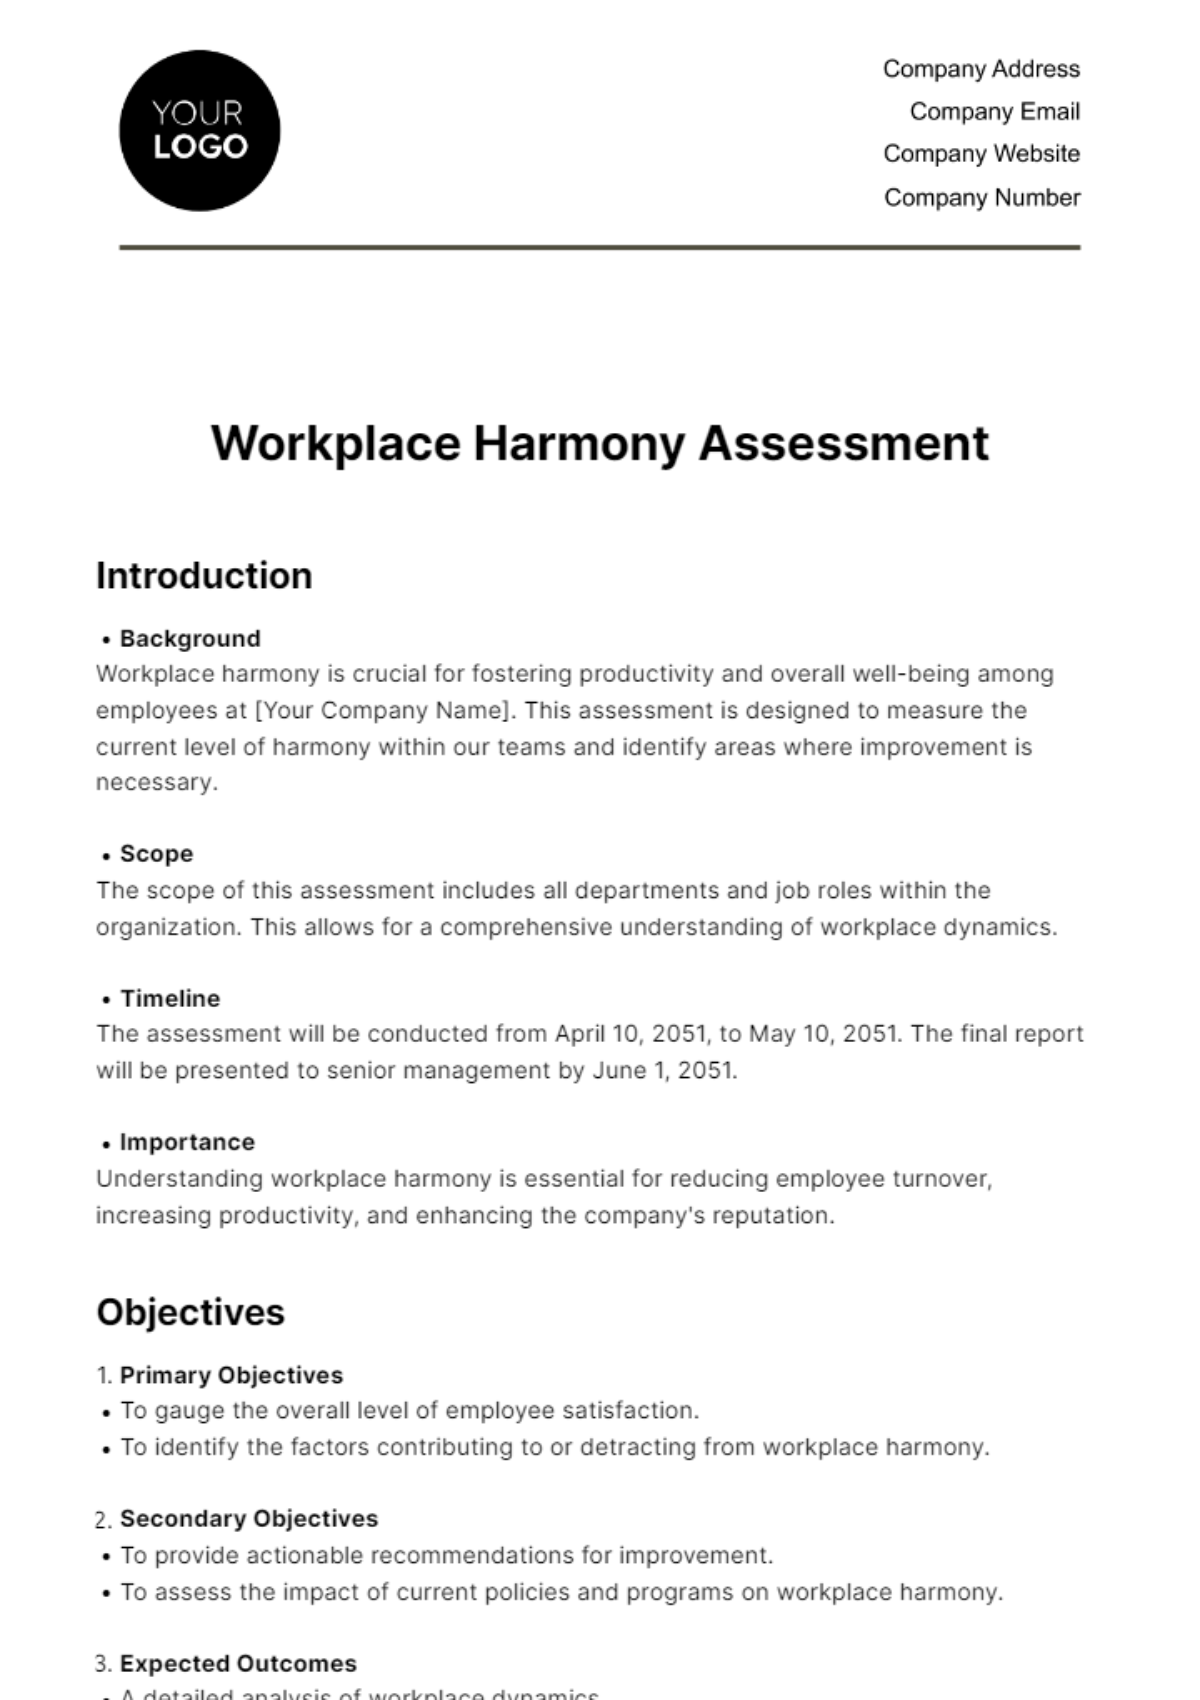 Workplace Harmony Assessment HR Template